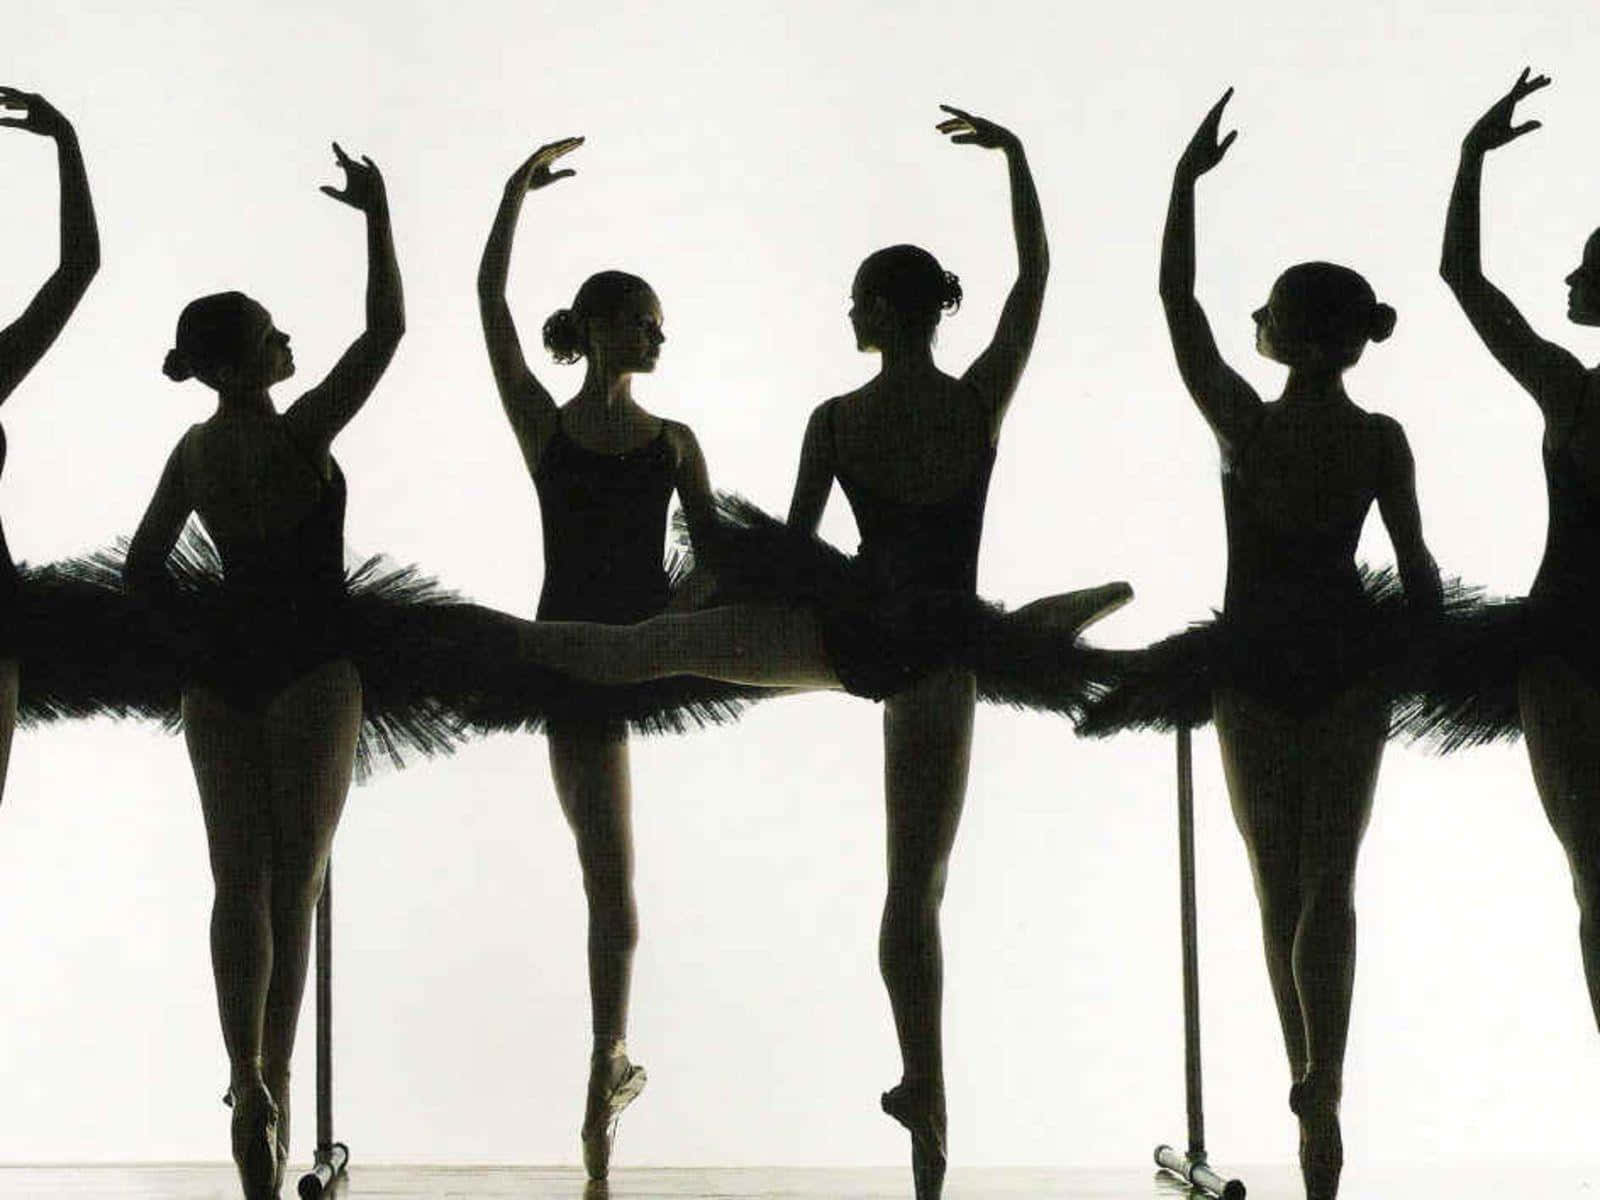 A Group Of Black Ballet Dancers In Silhouette